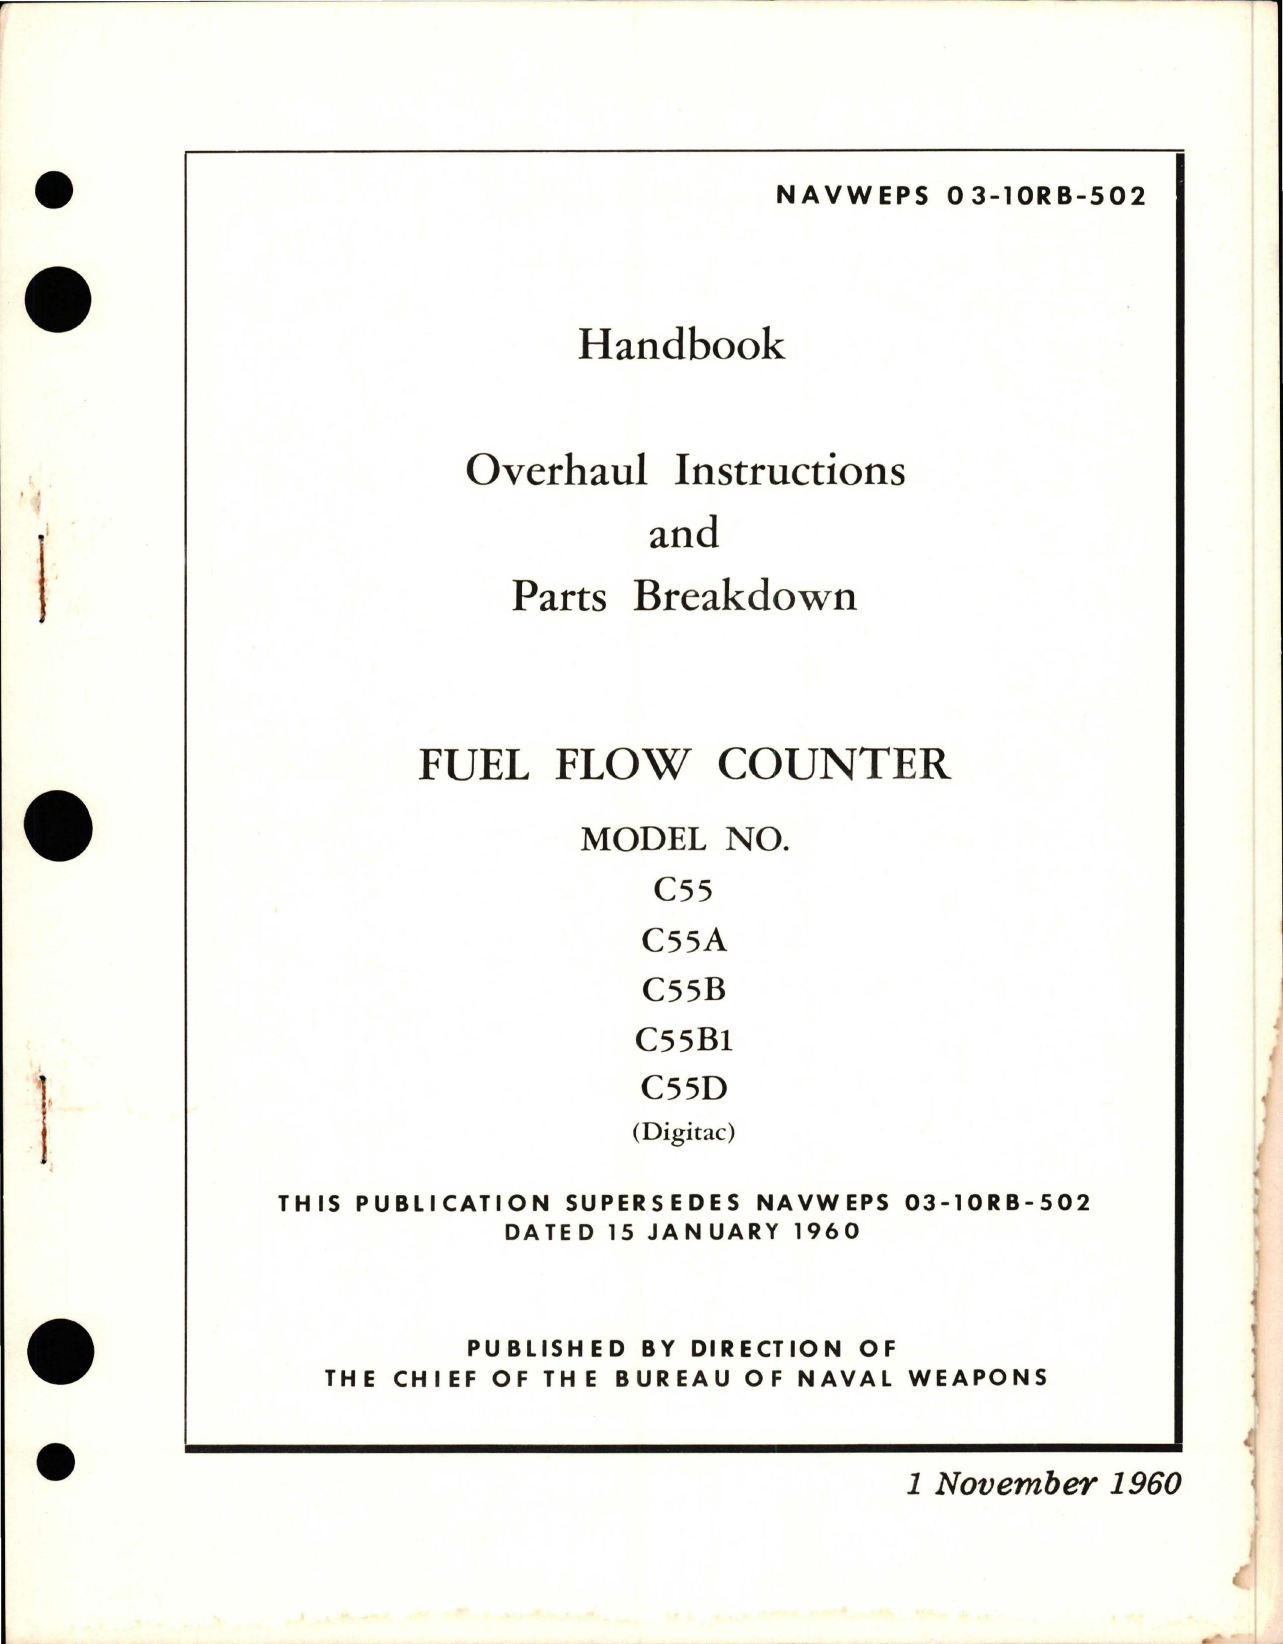 Sample page 1 from AirCorps Library document: Overhaul Instructions with Parts Breakdown for Fuel Flow Counter